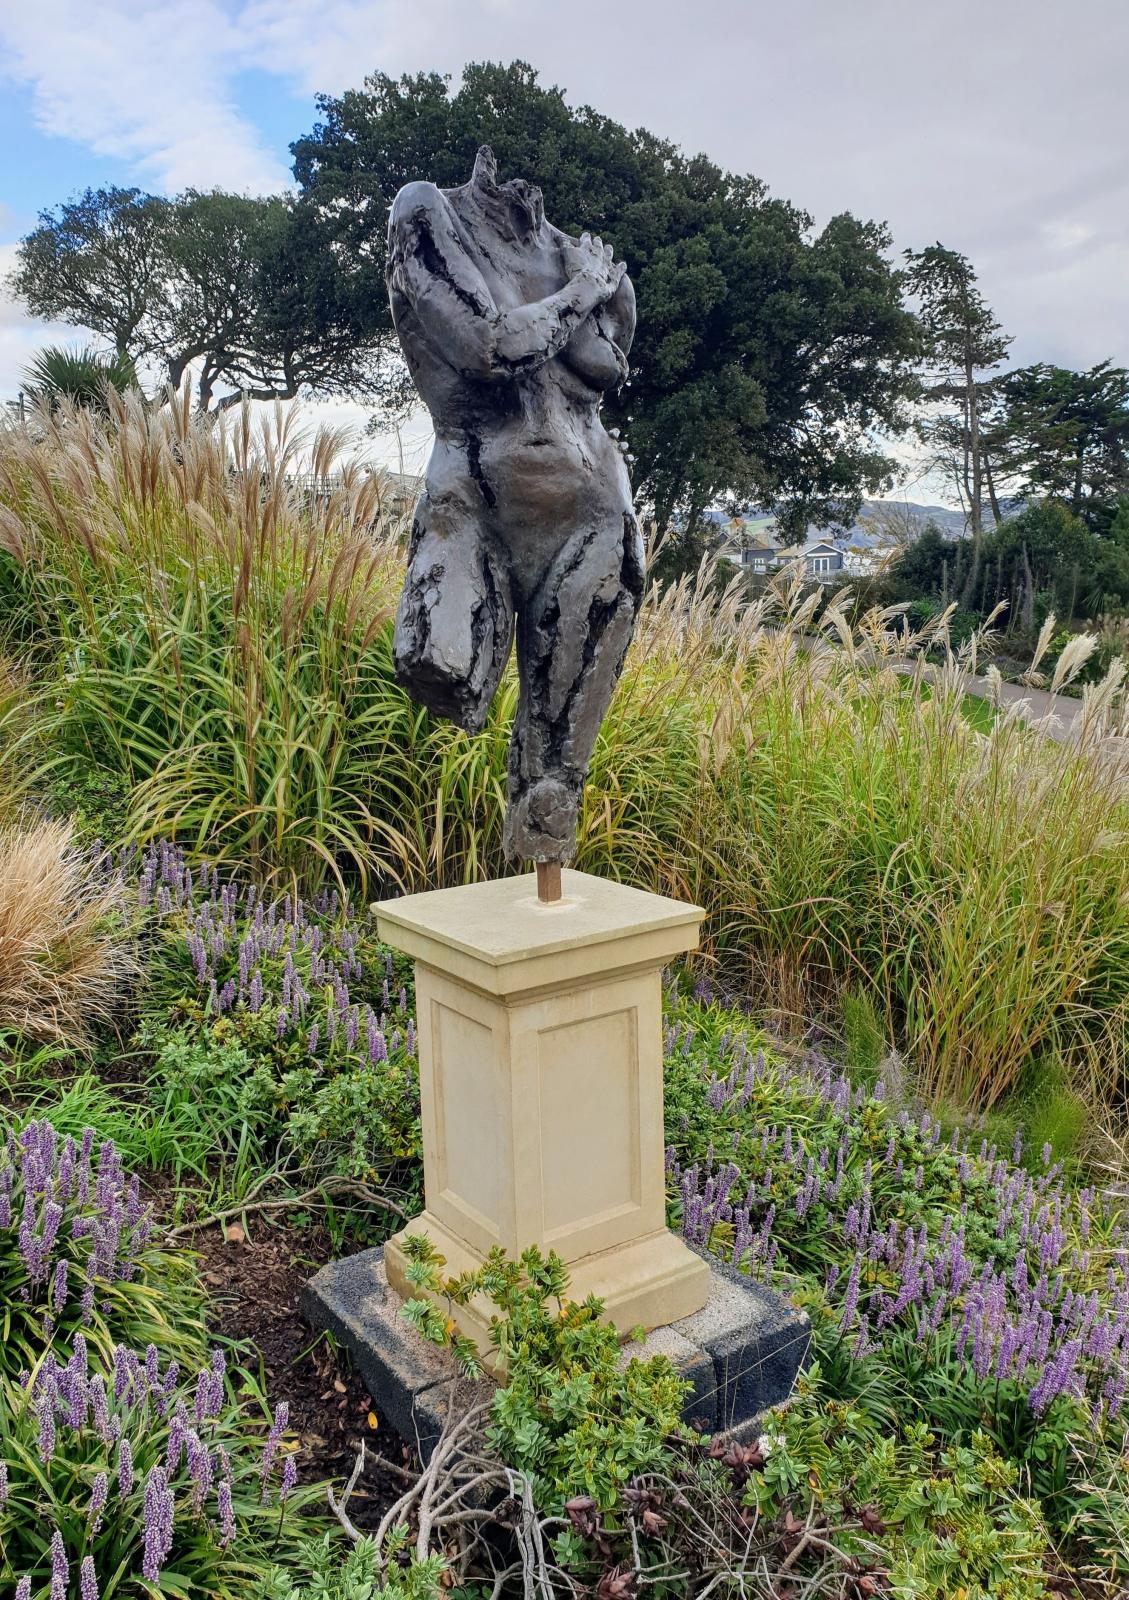 Persephone by Martin Staniforth, part of the Sculpture Trail in Langmoor Gardens, Lyme Regis